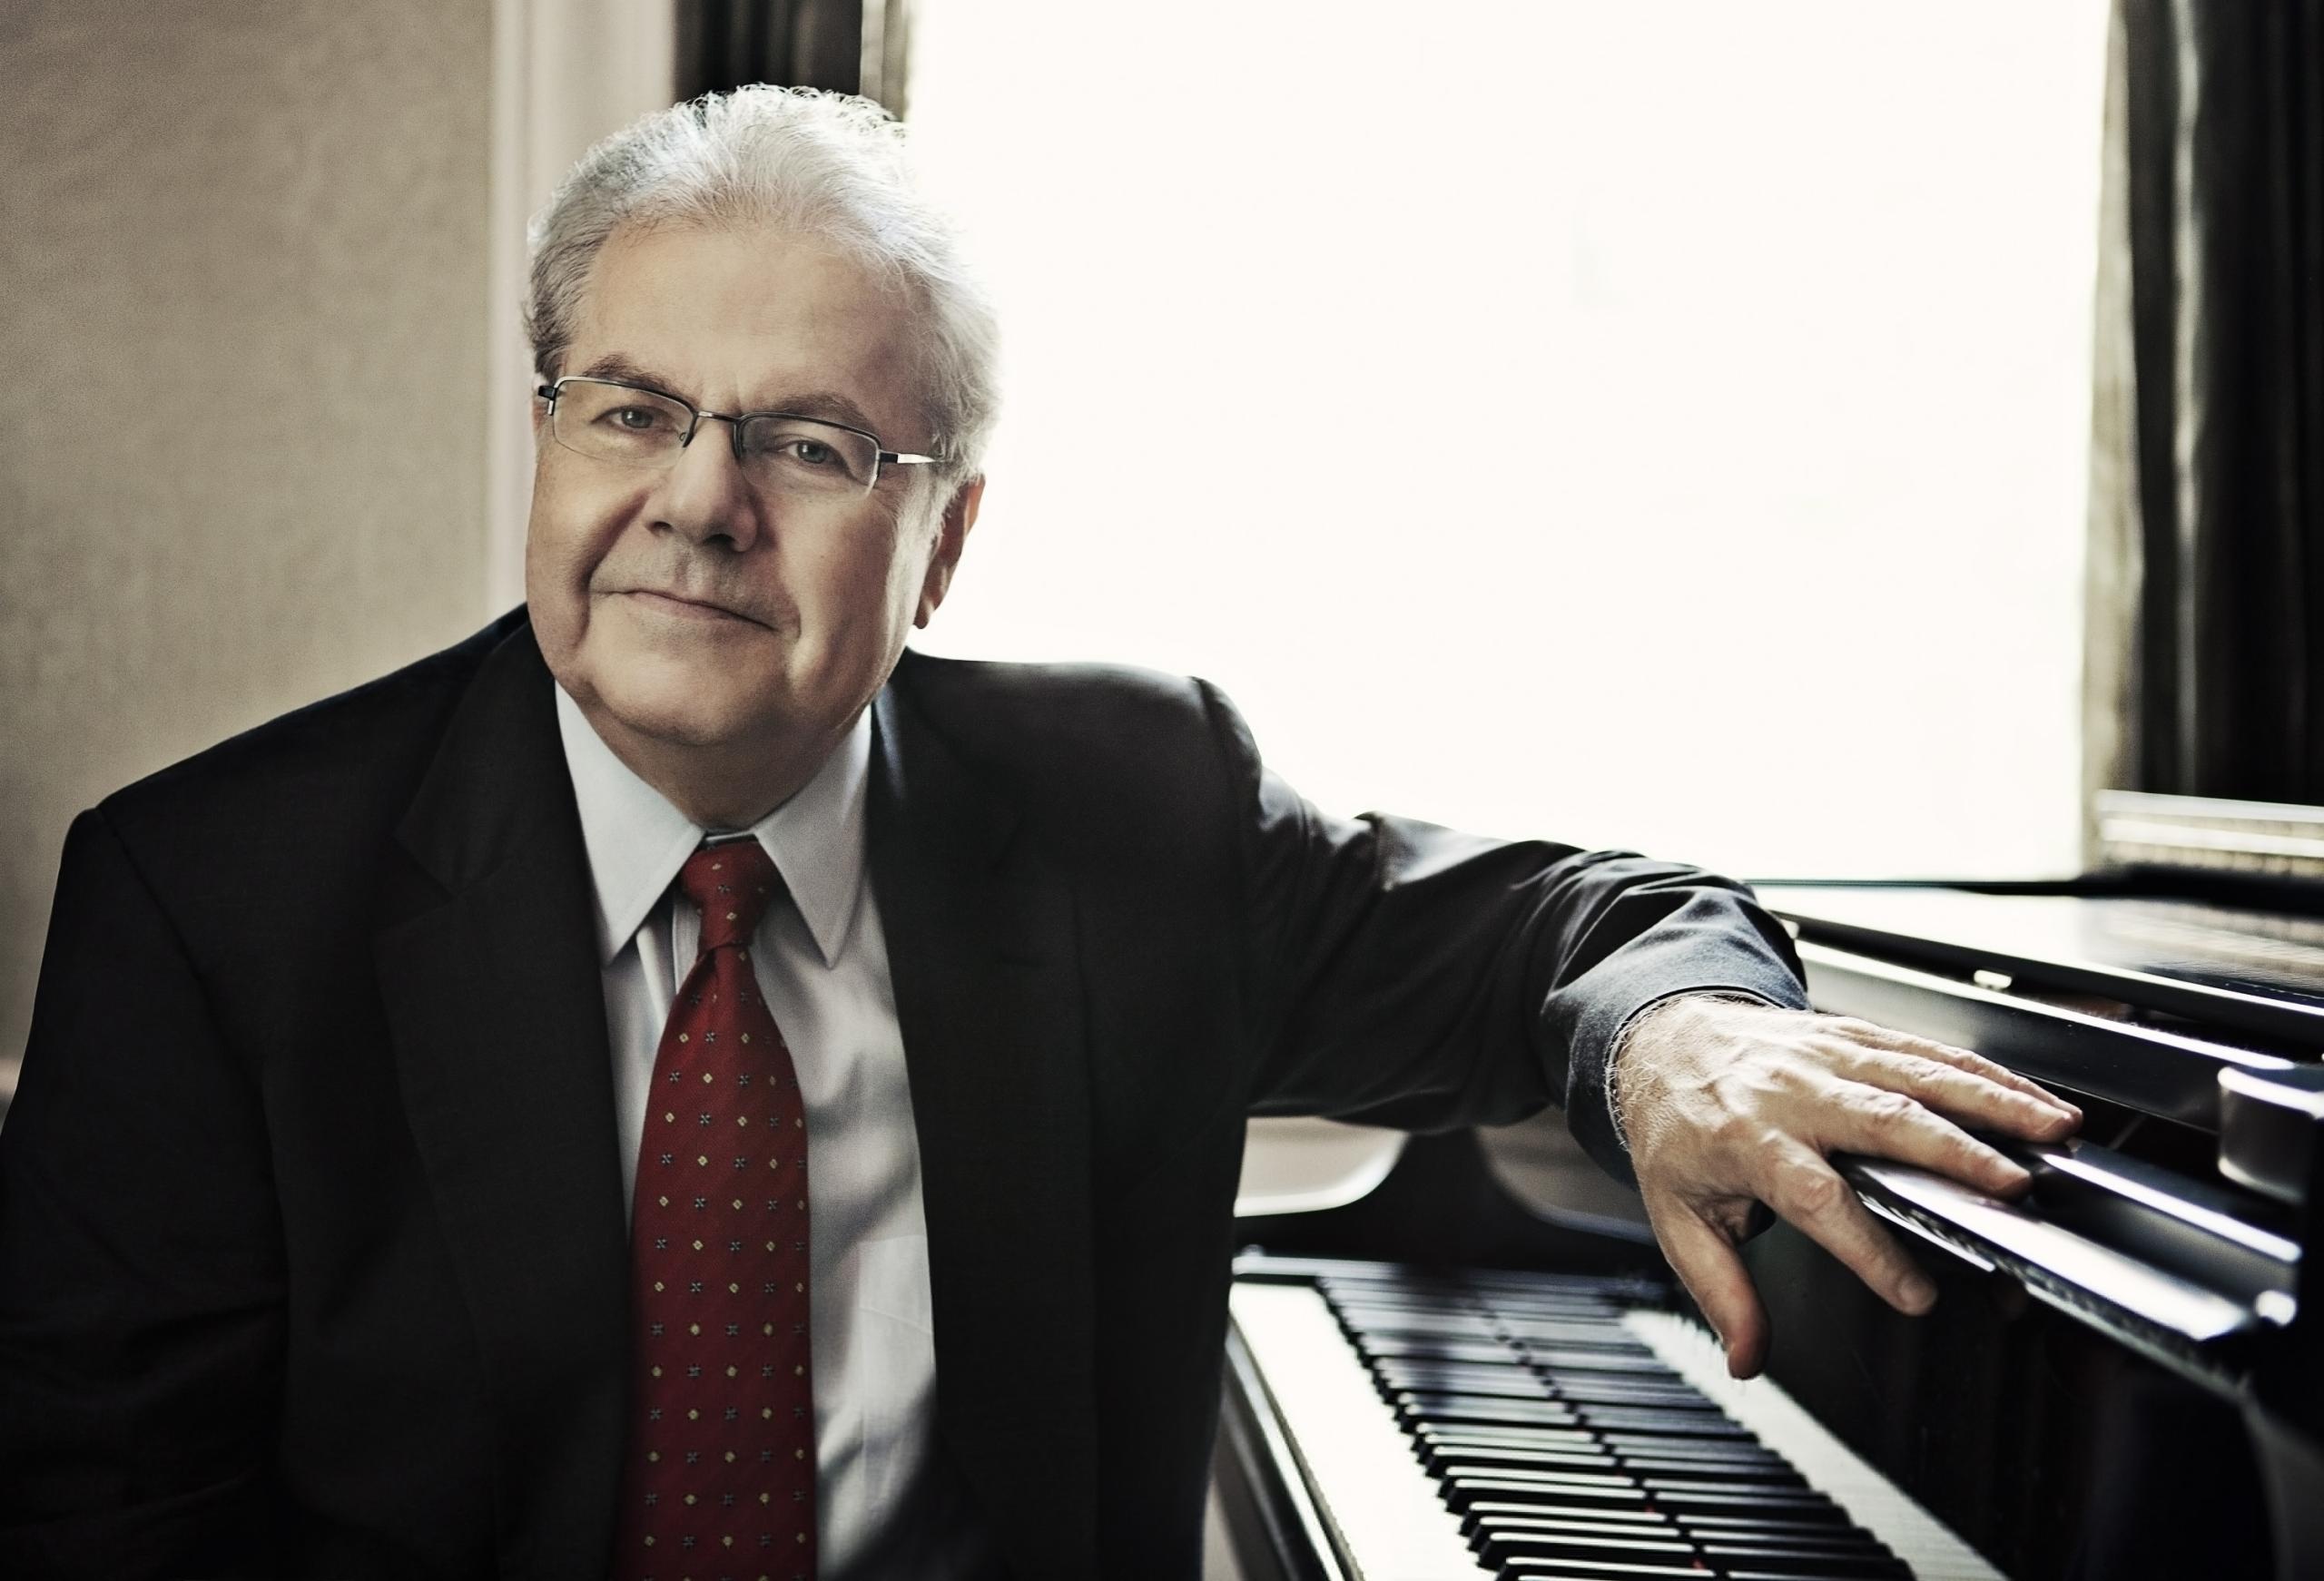 Pianist Emanuel Ax sits next to a black grand piano and looks into the camera